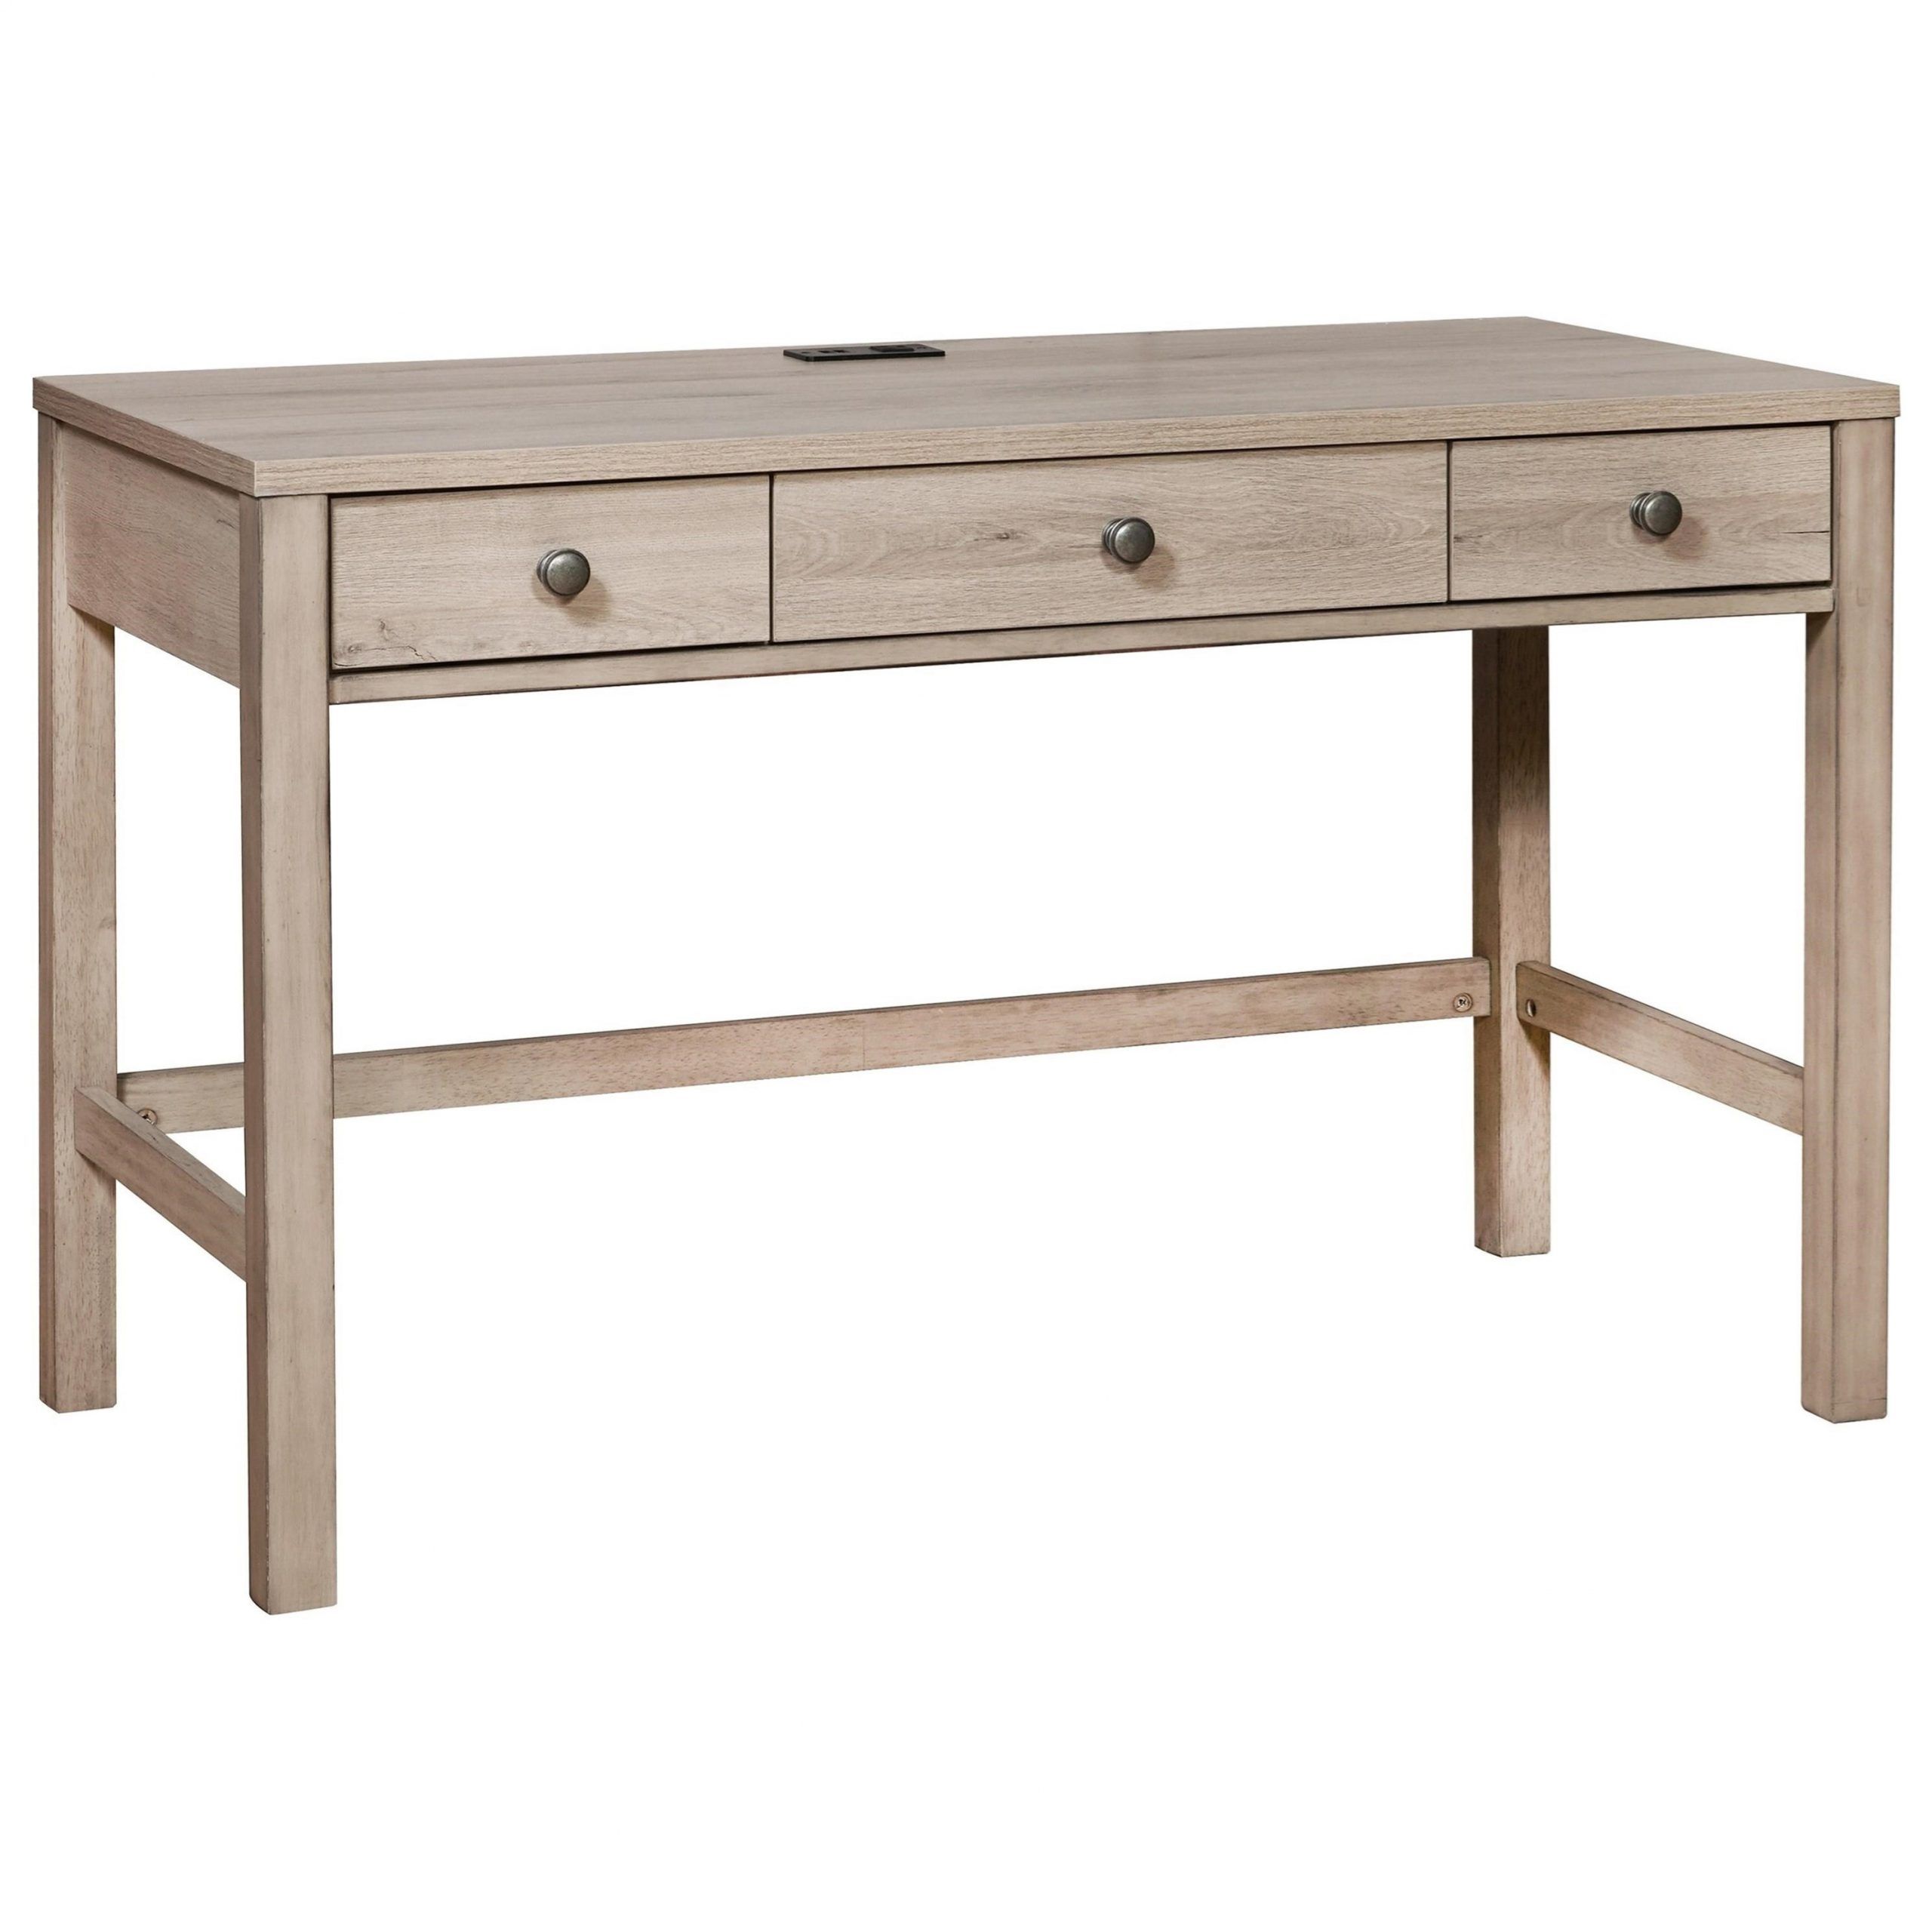 Samuel Lawrence Ash Creek 3 Drawer Desk With Usb Port | Morris Home With Acacia Wood Writing Desks With Usb Ports (View 1 of 15)